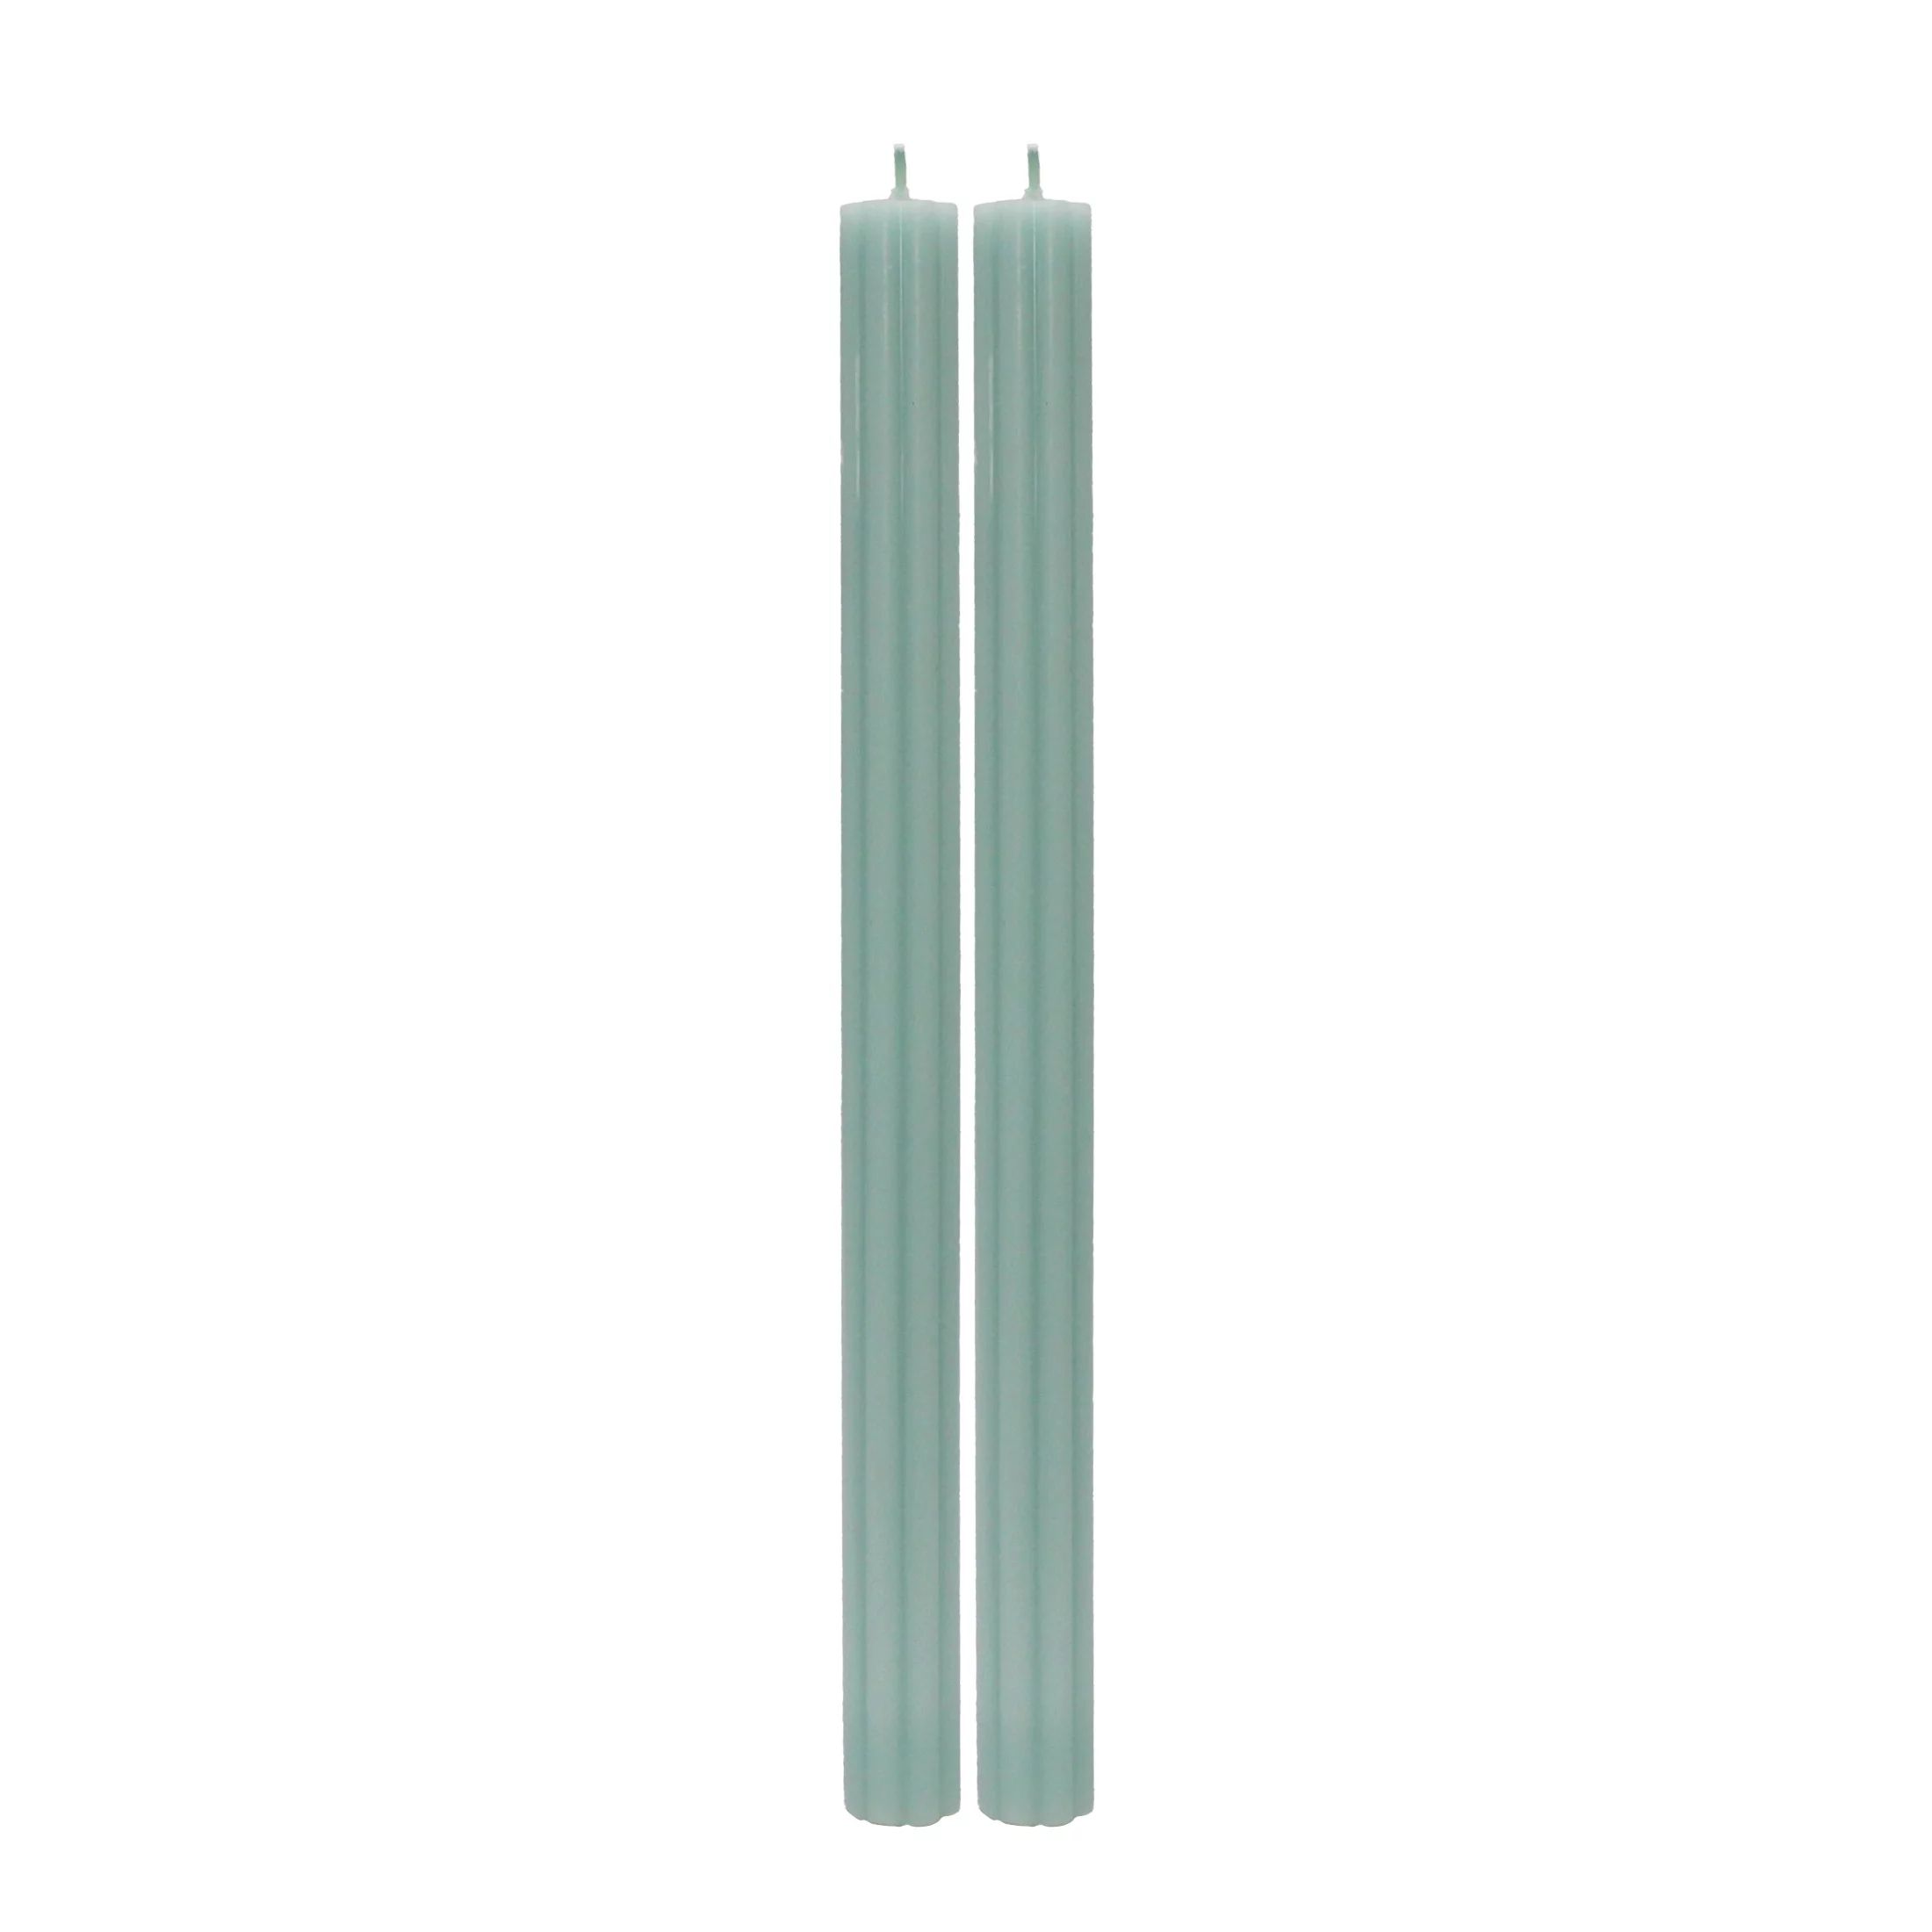 Better Homes & Gardens Unscented Taper Candles, Green, 2-Pack, 11 inches Height - Walmart.com | Walmart (US)